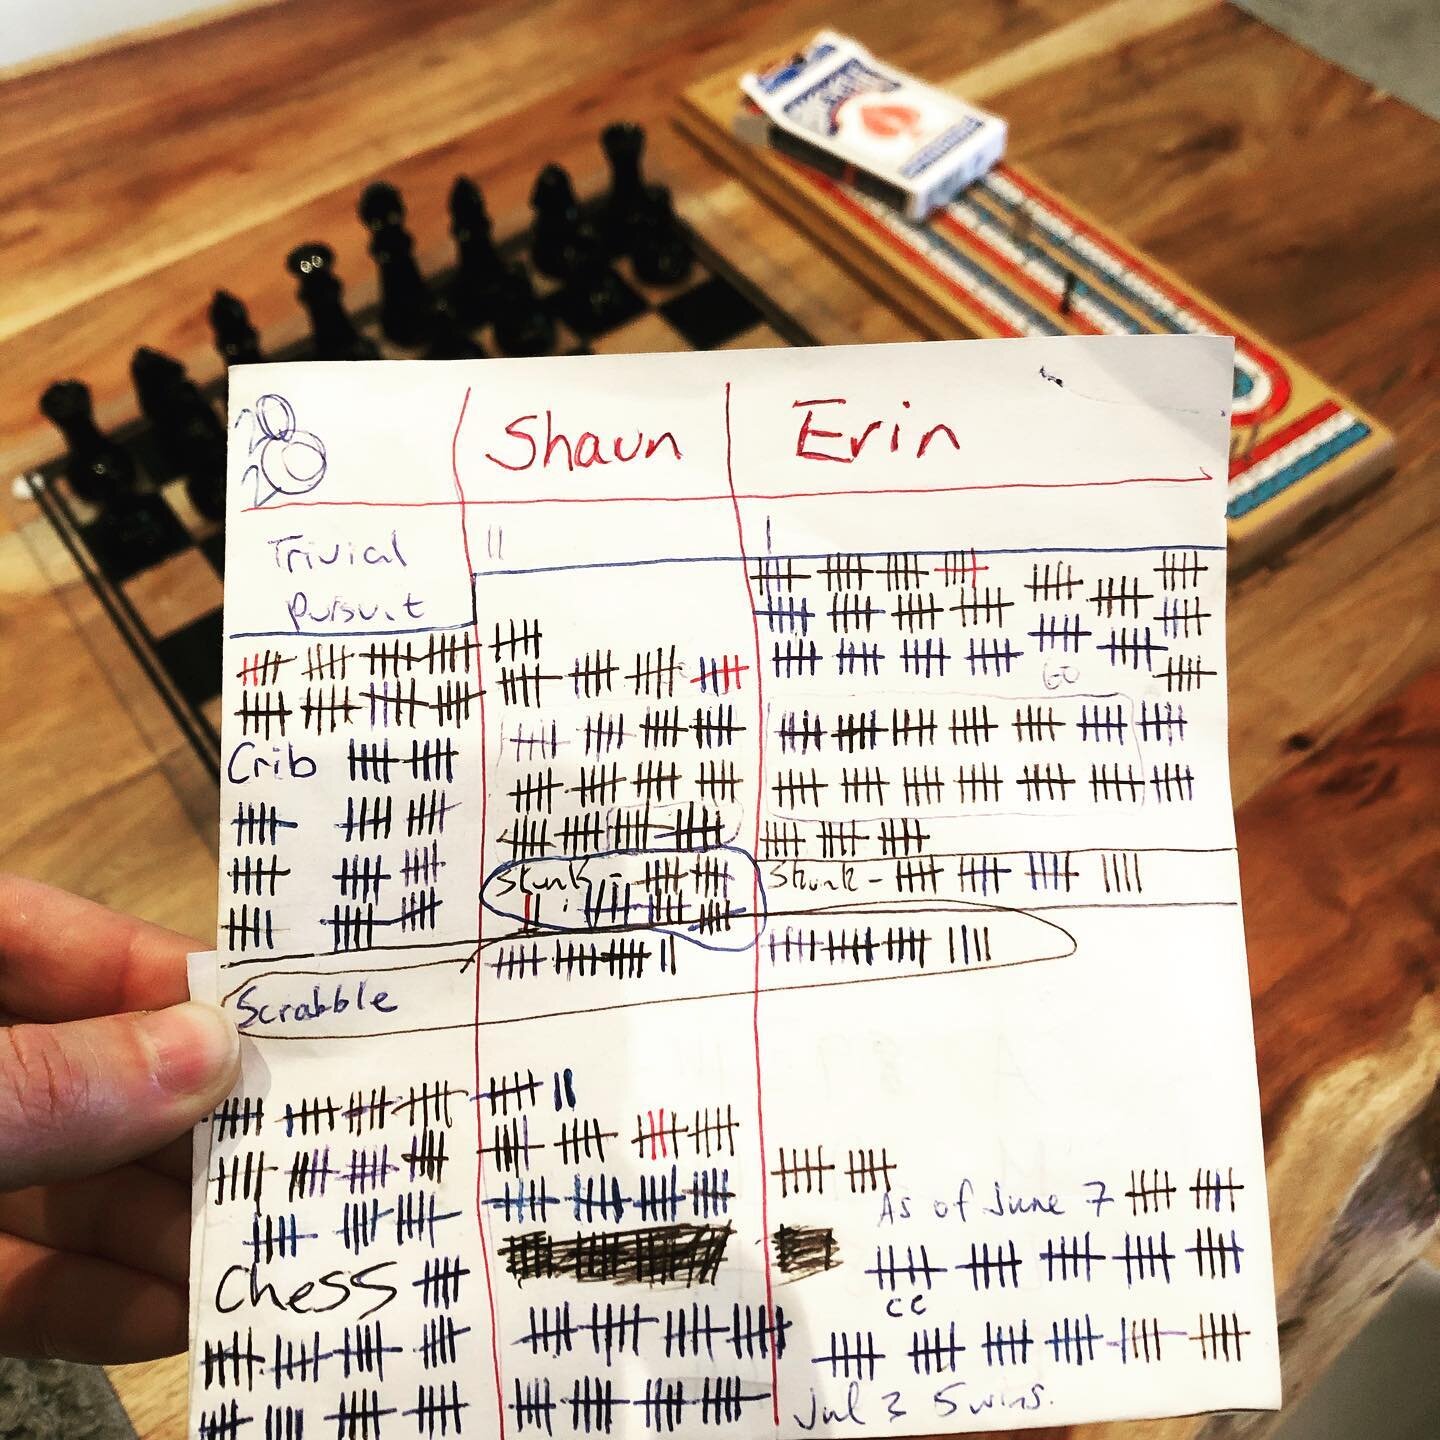 Guess it's time to start a new score sheet‼️Lots of laughs and trash talk in 2020, looking forward to a winning 2021 🧩♟❤️. Happy New Year, everyone 🎊🎉❄️ #boardgames #qualitytime #2020 #chessnerd #positivevibes #happynewyear